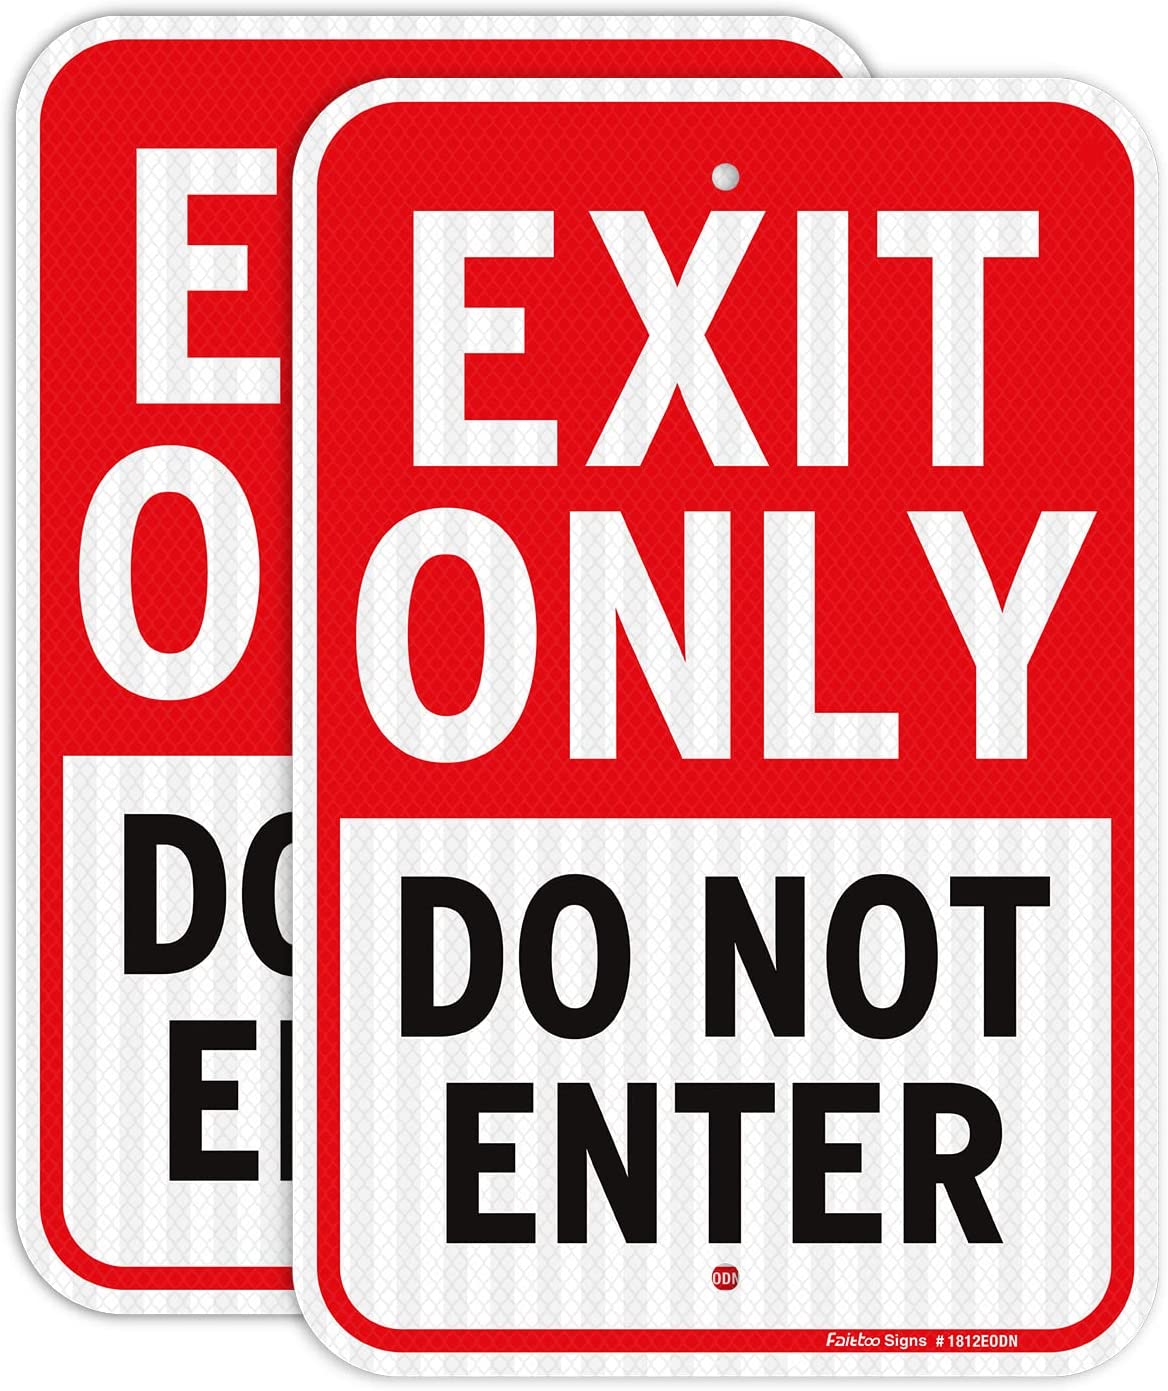 Faittoo Exit Only - Do Not Enter Sign, 18 x 12 Inches Engineer Grade Reflective Sheeting Rust Free Aluminum, UV Protected, Weather/Fade Resistant, Easy to Install and Read, Indoor/ Outdoors Use